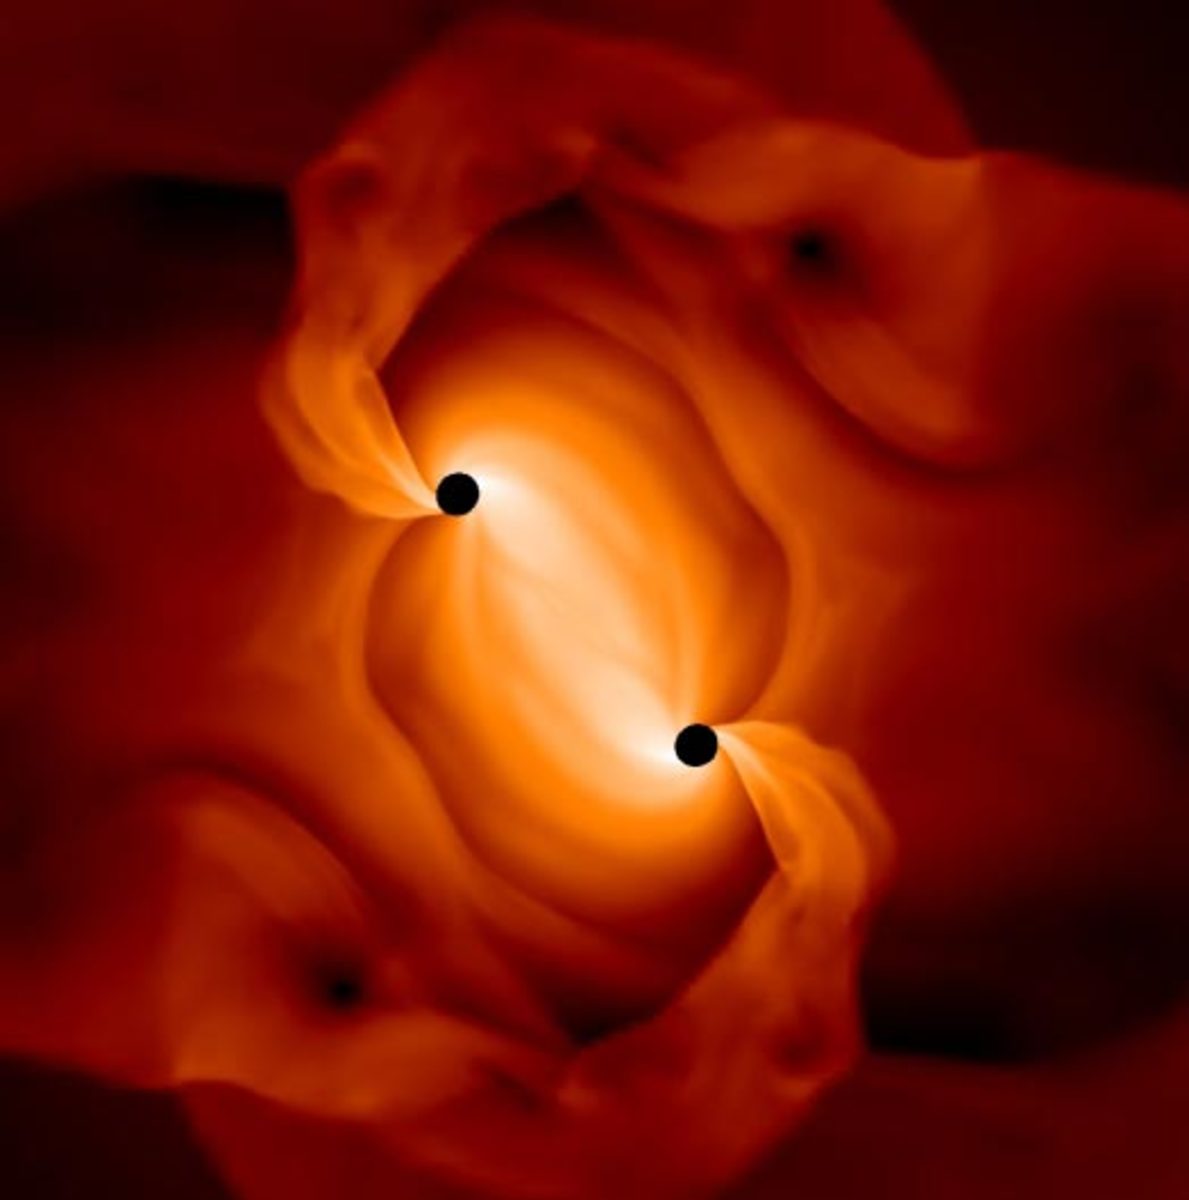 What happens when two black holes collide?